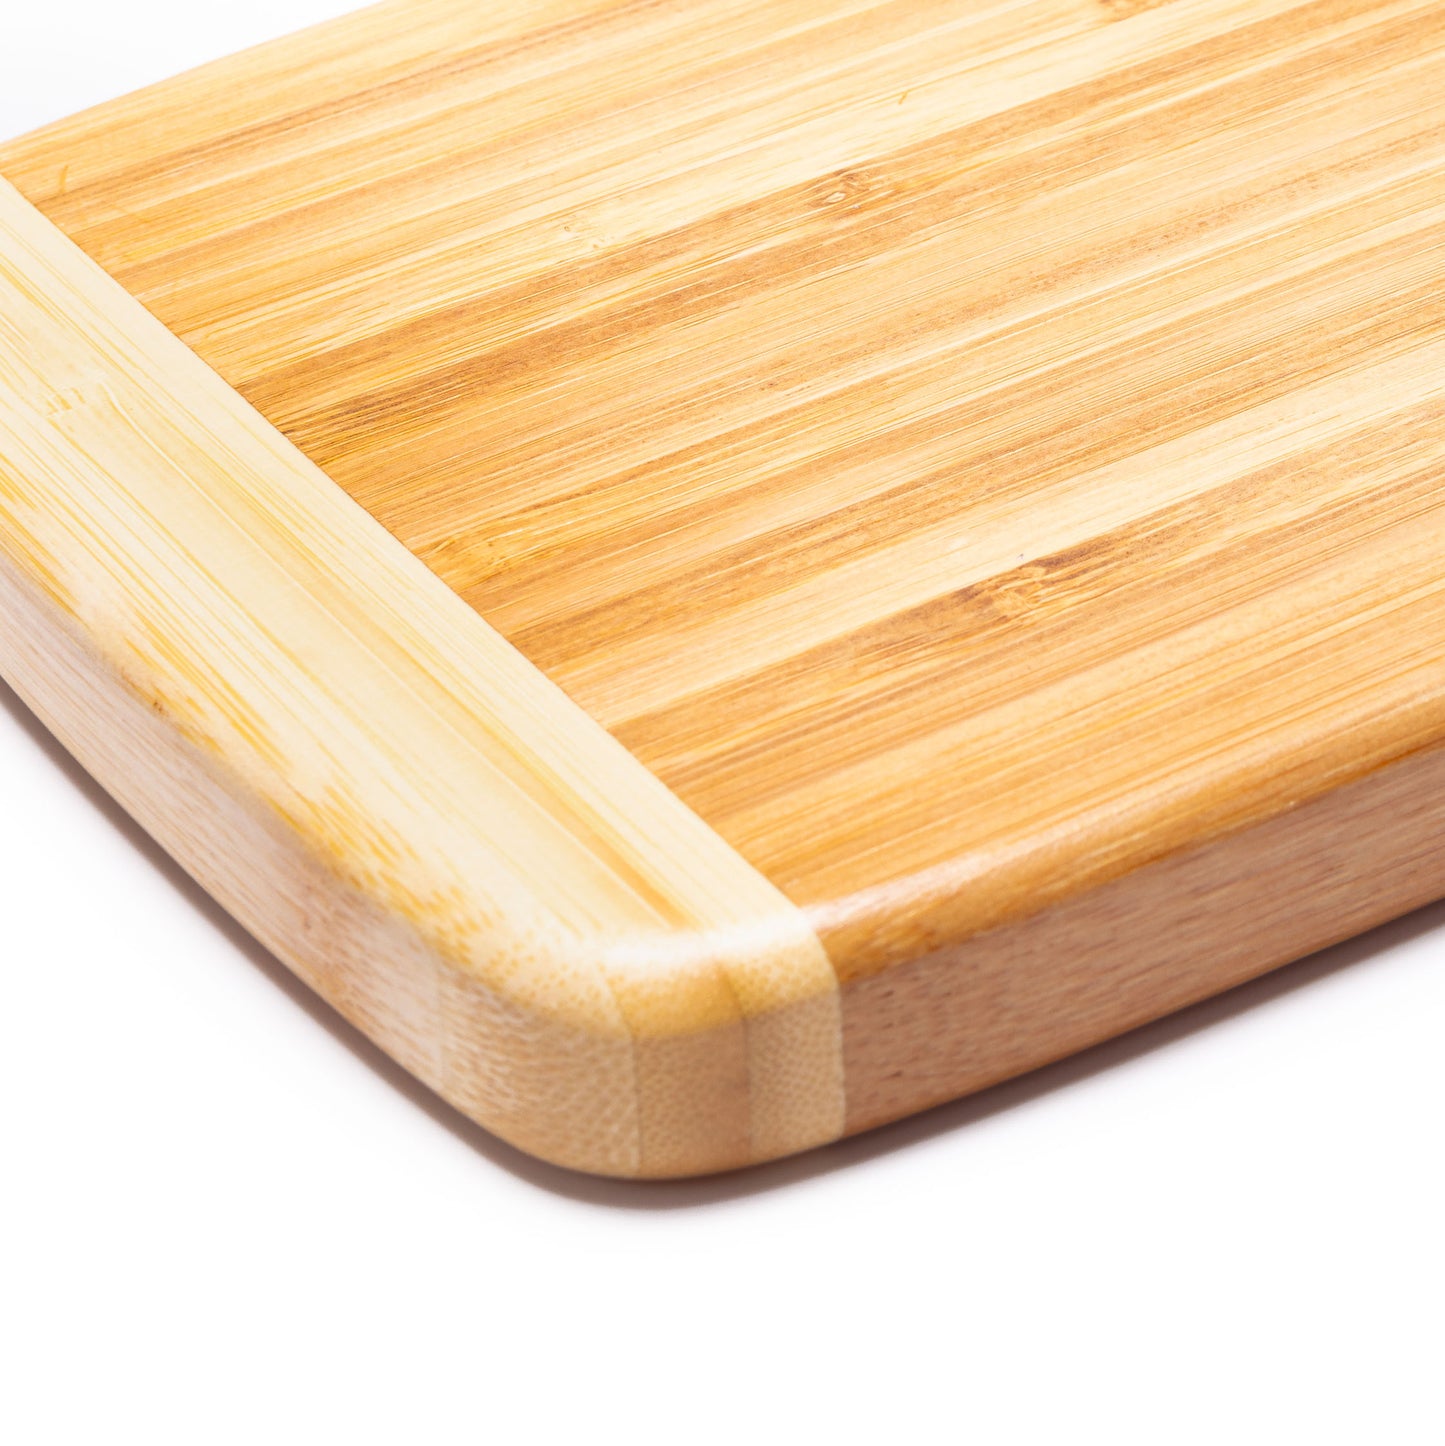 Compact Burnished Bamboo Cutting Board, 5x7 Inches